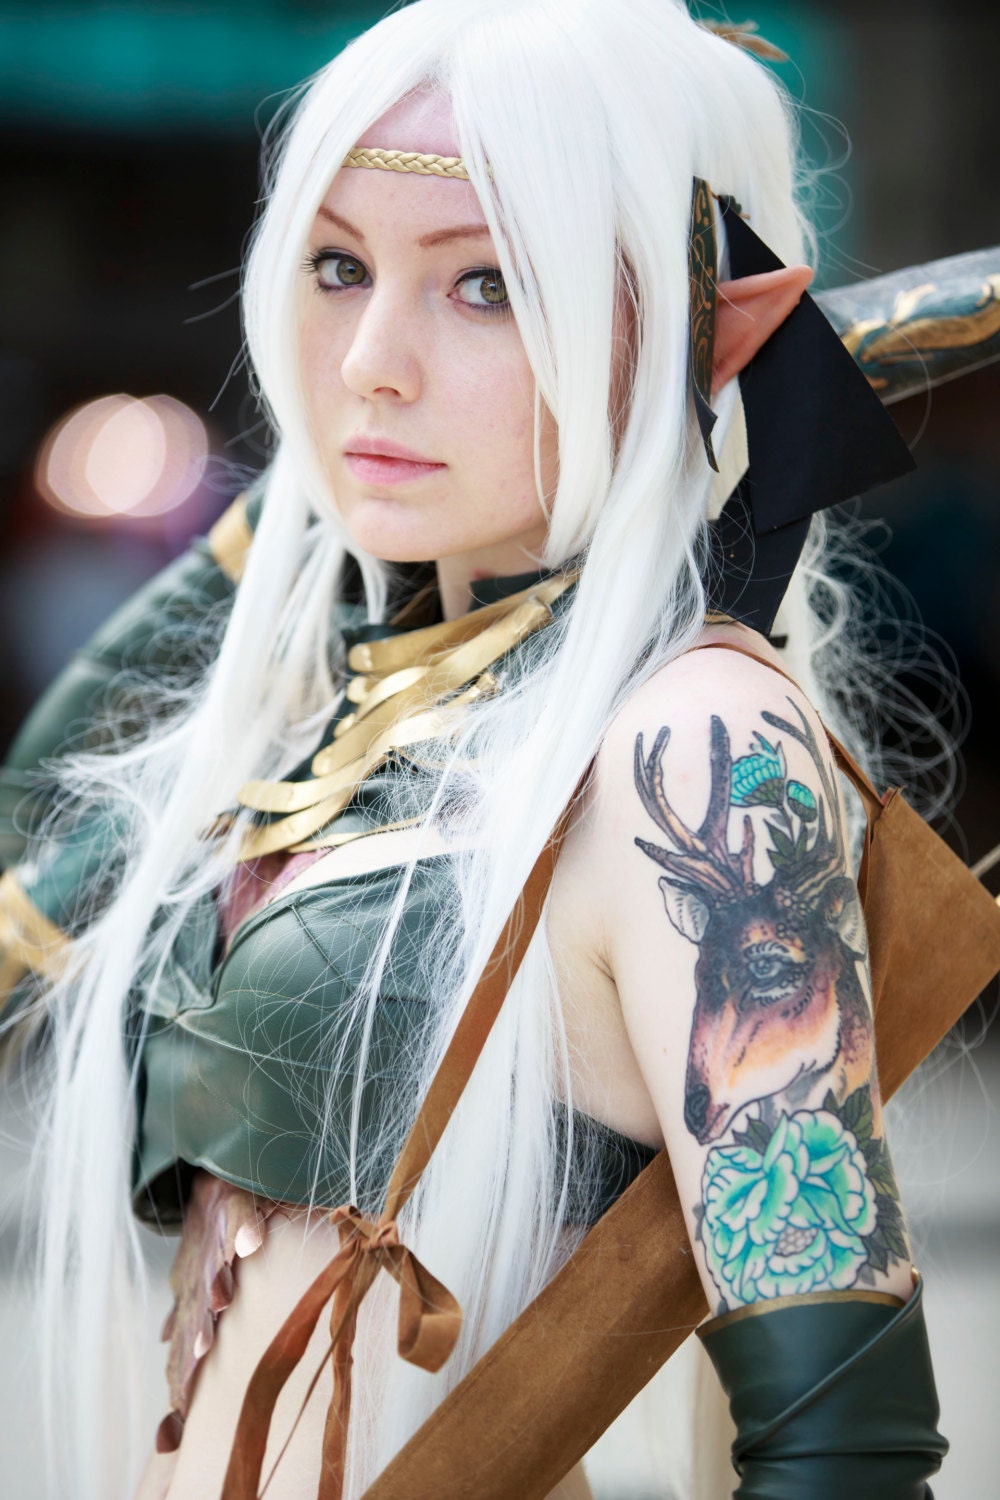 Elf Cosplay Print By Shamandaliesuicide On Etsy